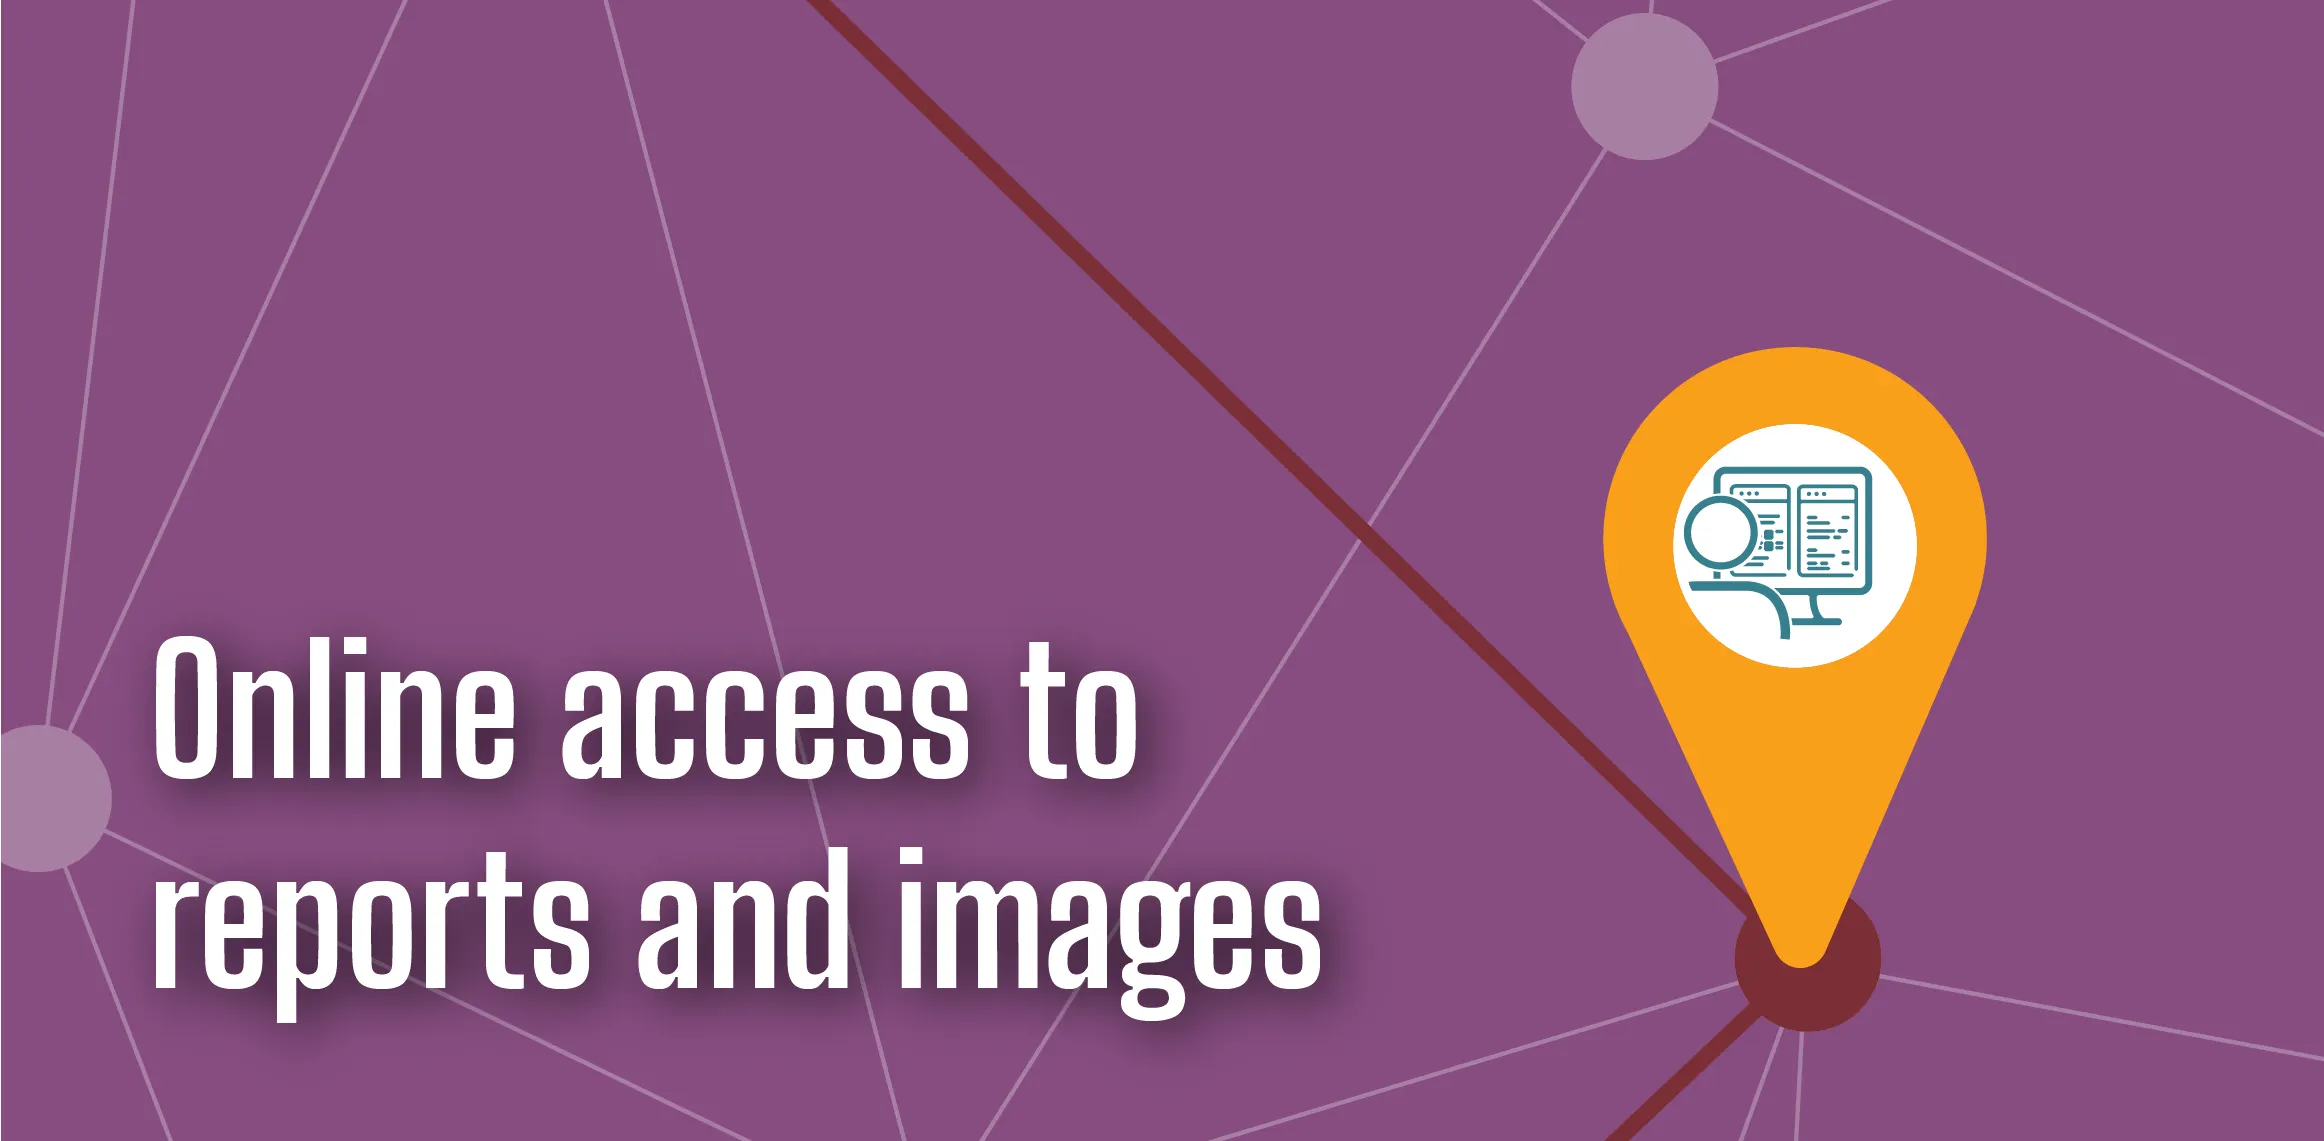 Online access to reports and images